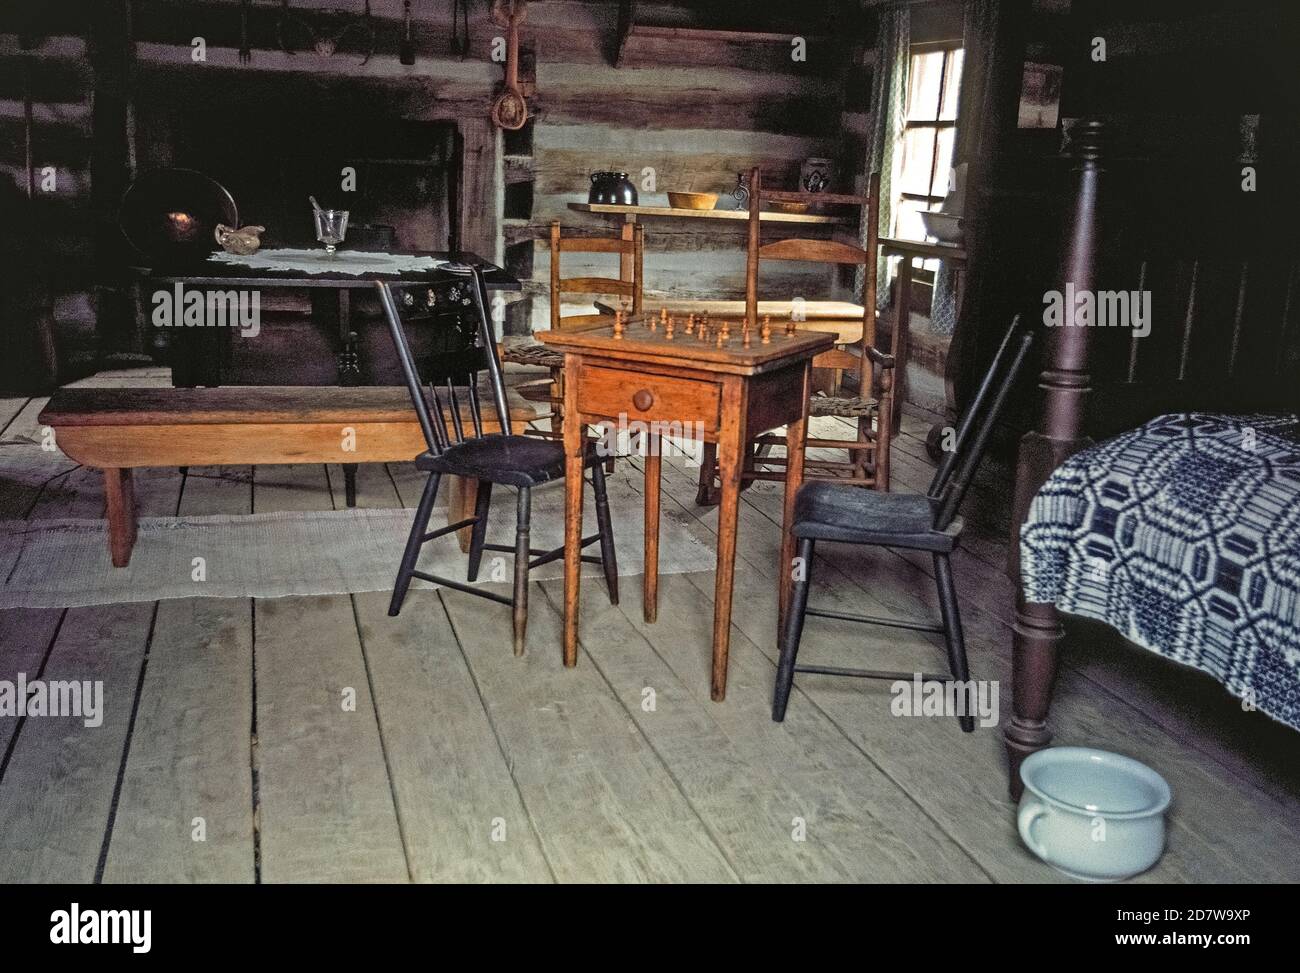 Simple furnishings are seen in the interior of this log cabin in New Salem, now an historical village that was once home to Abraham Lincoln, 16th President of the United States. He moved to the small central Illinois settlement in 1831 at the age of 22 and stayed for six years before becoming a lawyer and politician. Notable is the chess board with wooden playing pieces, and a porcelain chamber pot next to the bed. New Salem only existed for about a dozen years before being abandoned. Reconstructed in the 1930-40s by the Civilian Conservation Corps (CCC), it features 23 log buildings. Stock Photo